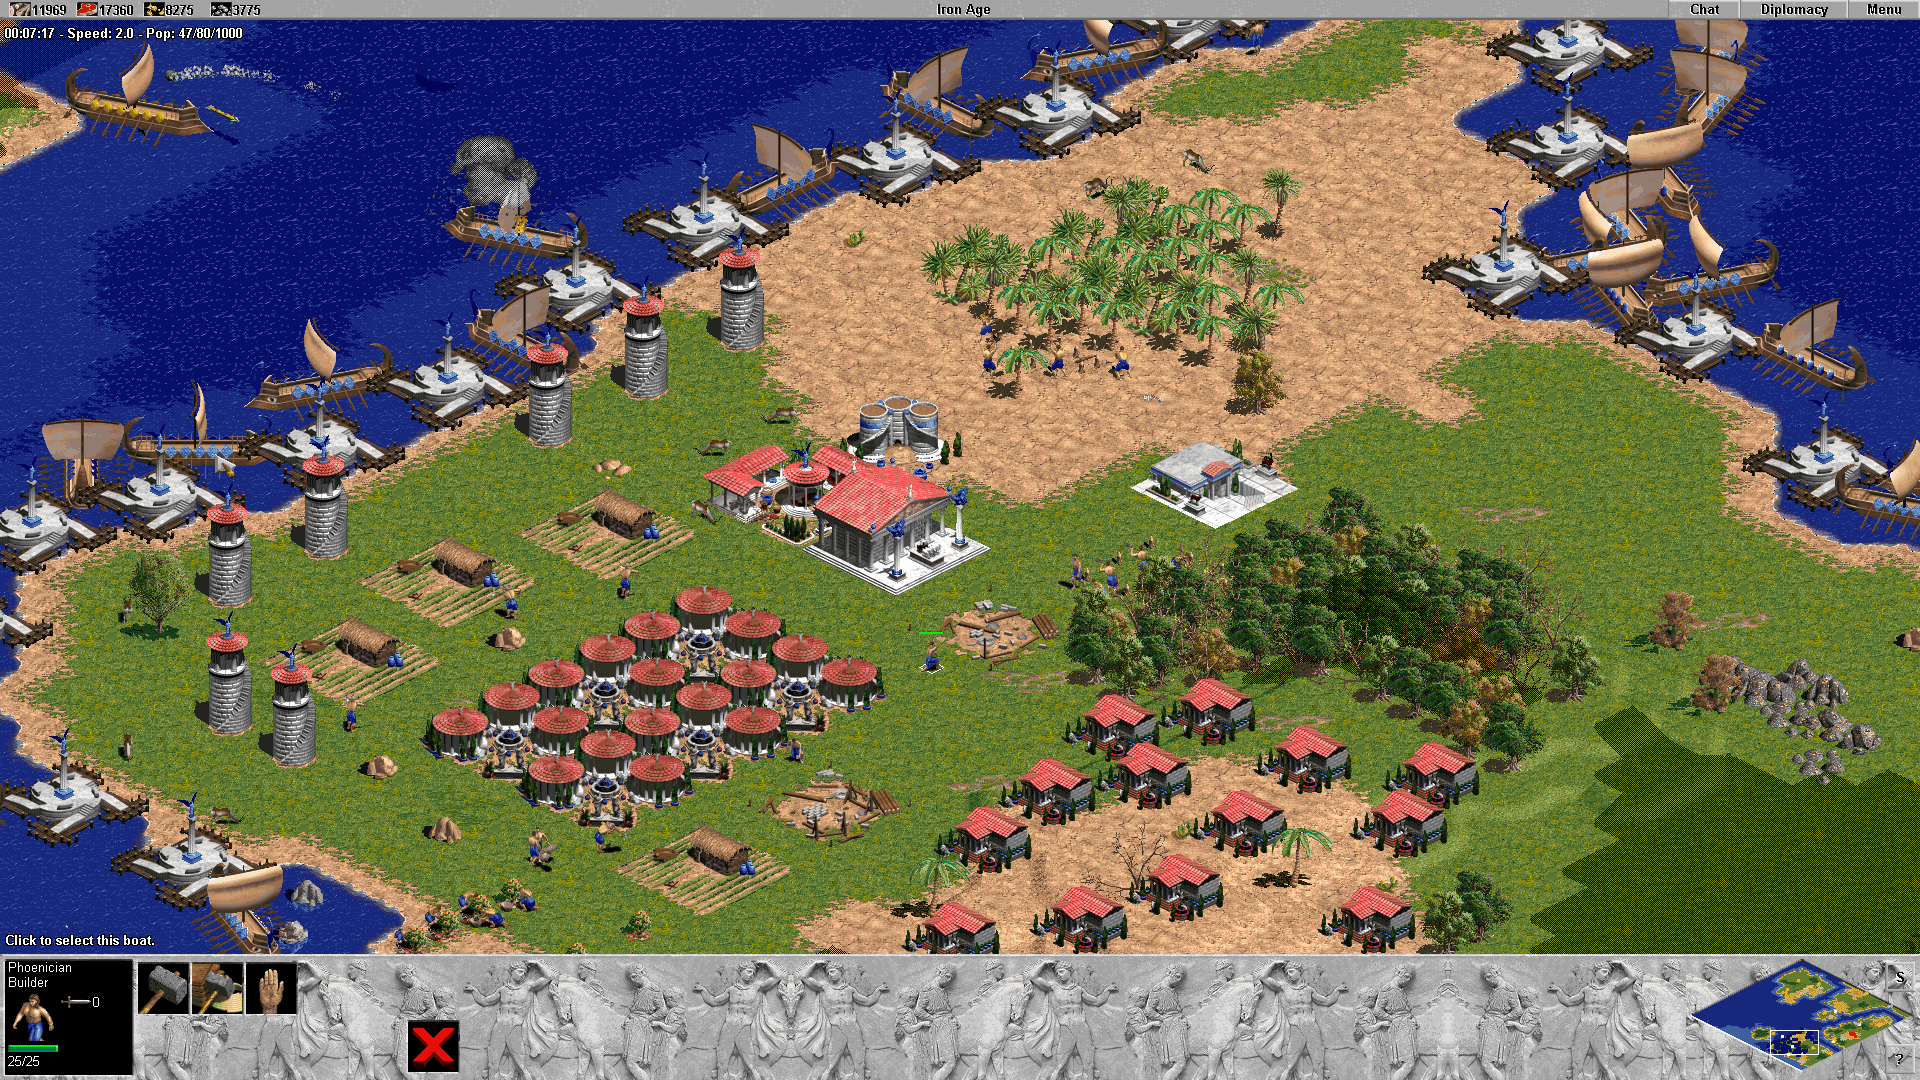 High Resolution Wallpaper | Age Of Empires 1920x1080 px